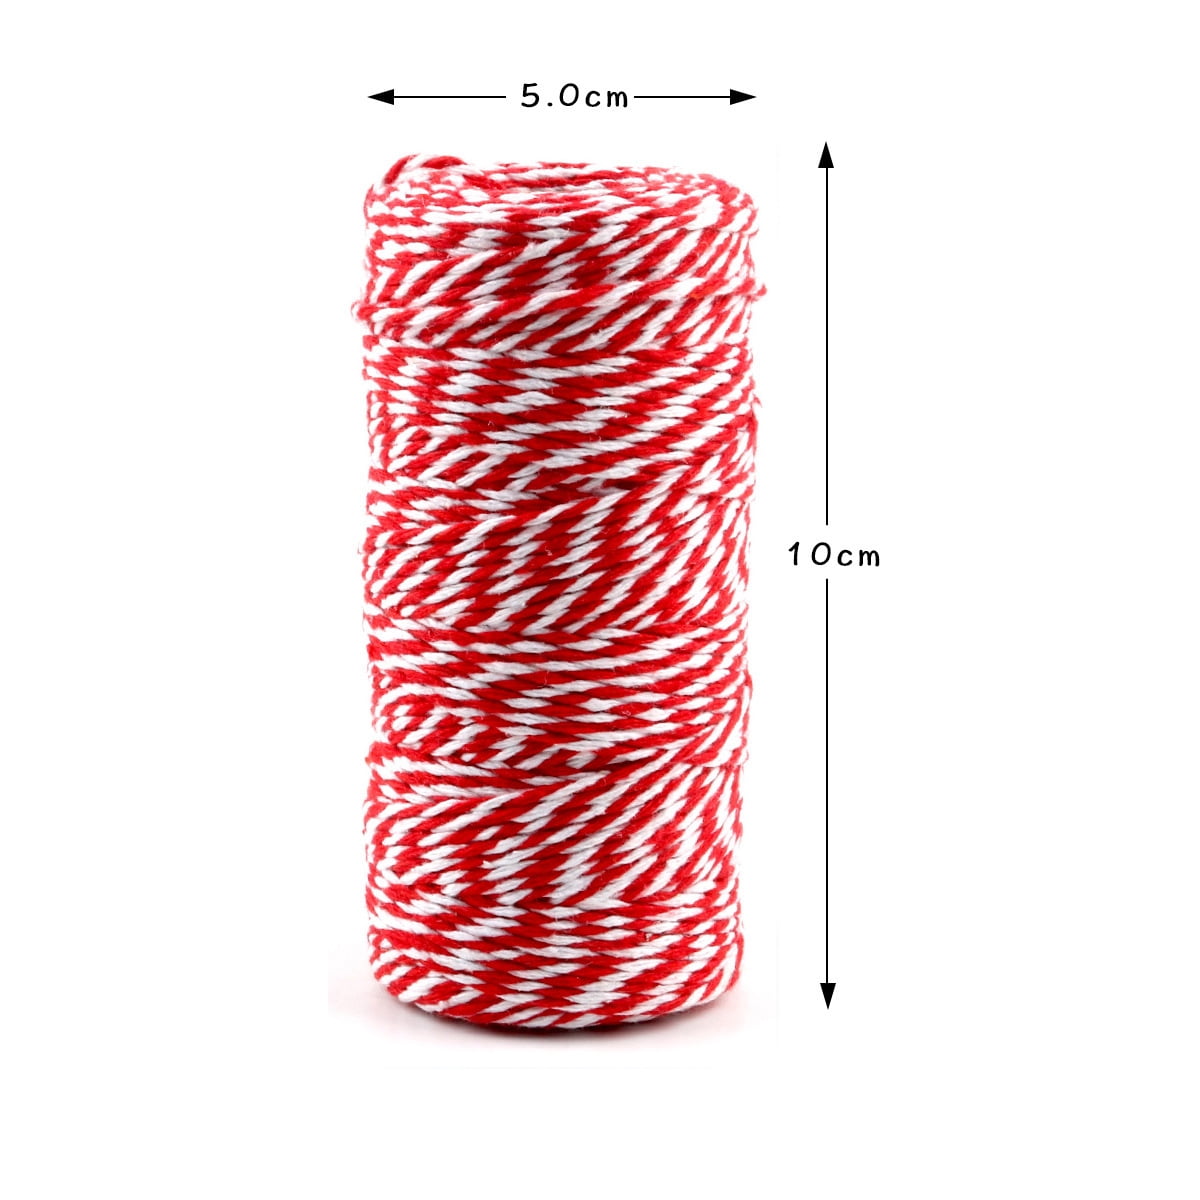 100 M Red and Gold String,Red Christmas Cotton Twine –